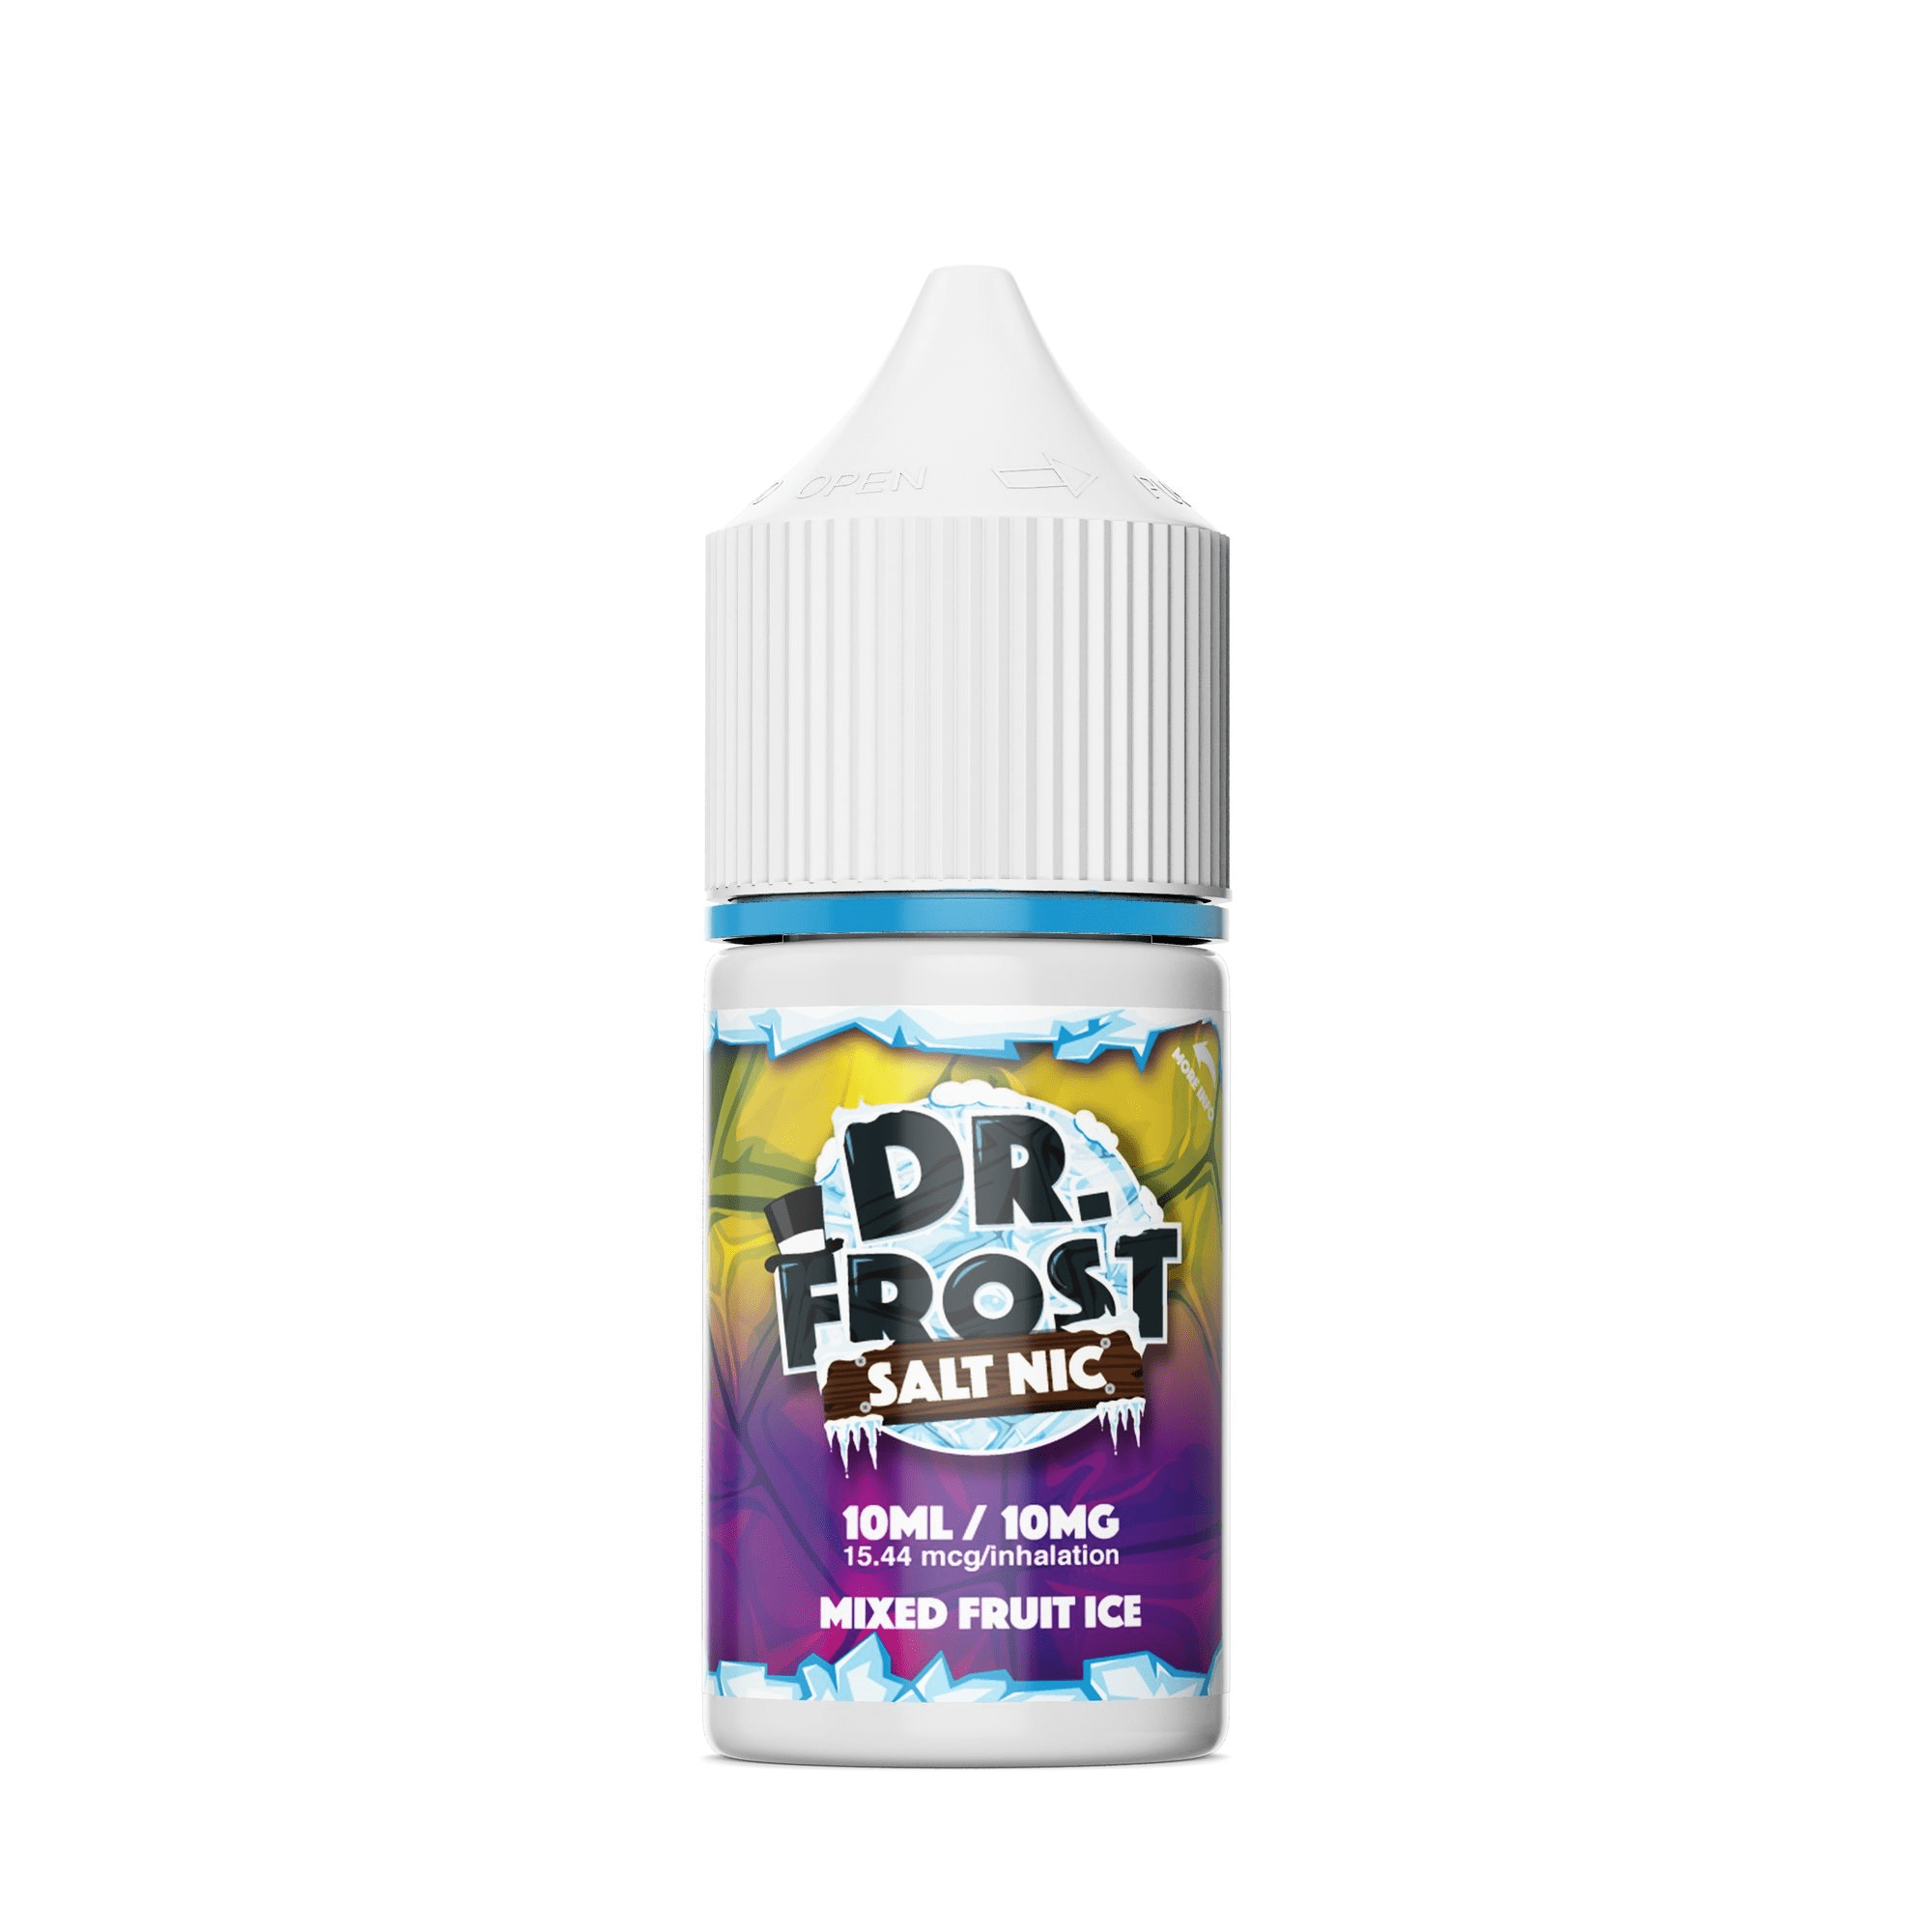  Mixed Fruit Ice Nic Salt E-Liquid by Dr Frost 10ml 